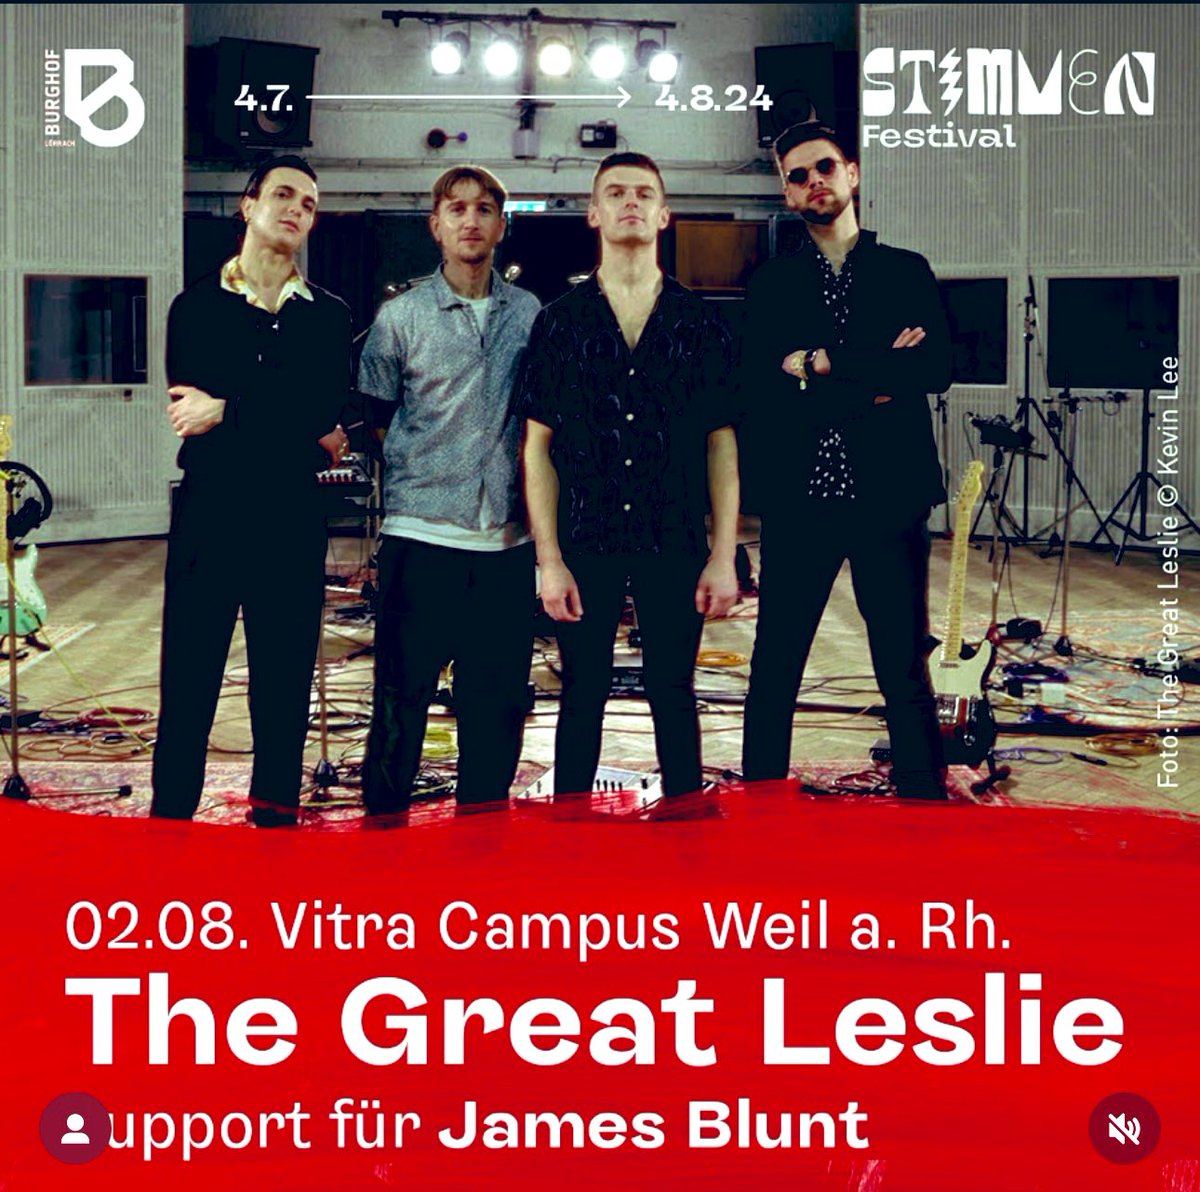 🔔FINALLY🔔 Pleased to announce we’ll be supporting the one & only @JamesBlunt @stimmenfestival in Germany in August. Still not over the fact we played with @Franz_Ferdinand & this is our 2nd major support show. HOW CRAZY IS THIS?! Like & share people. TGL & JB, what a combo!🥳